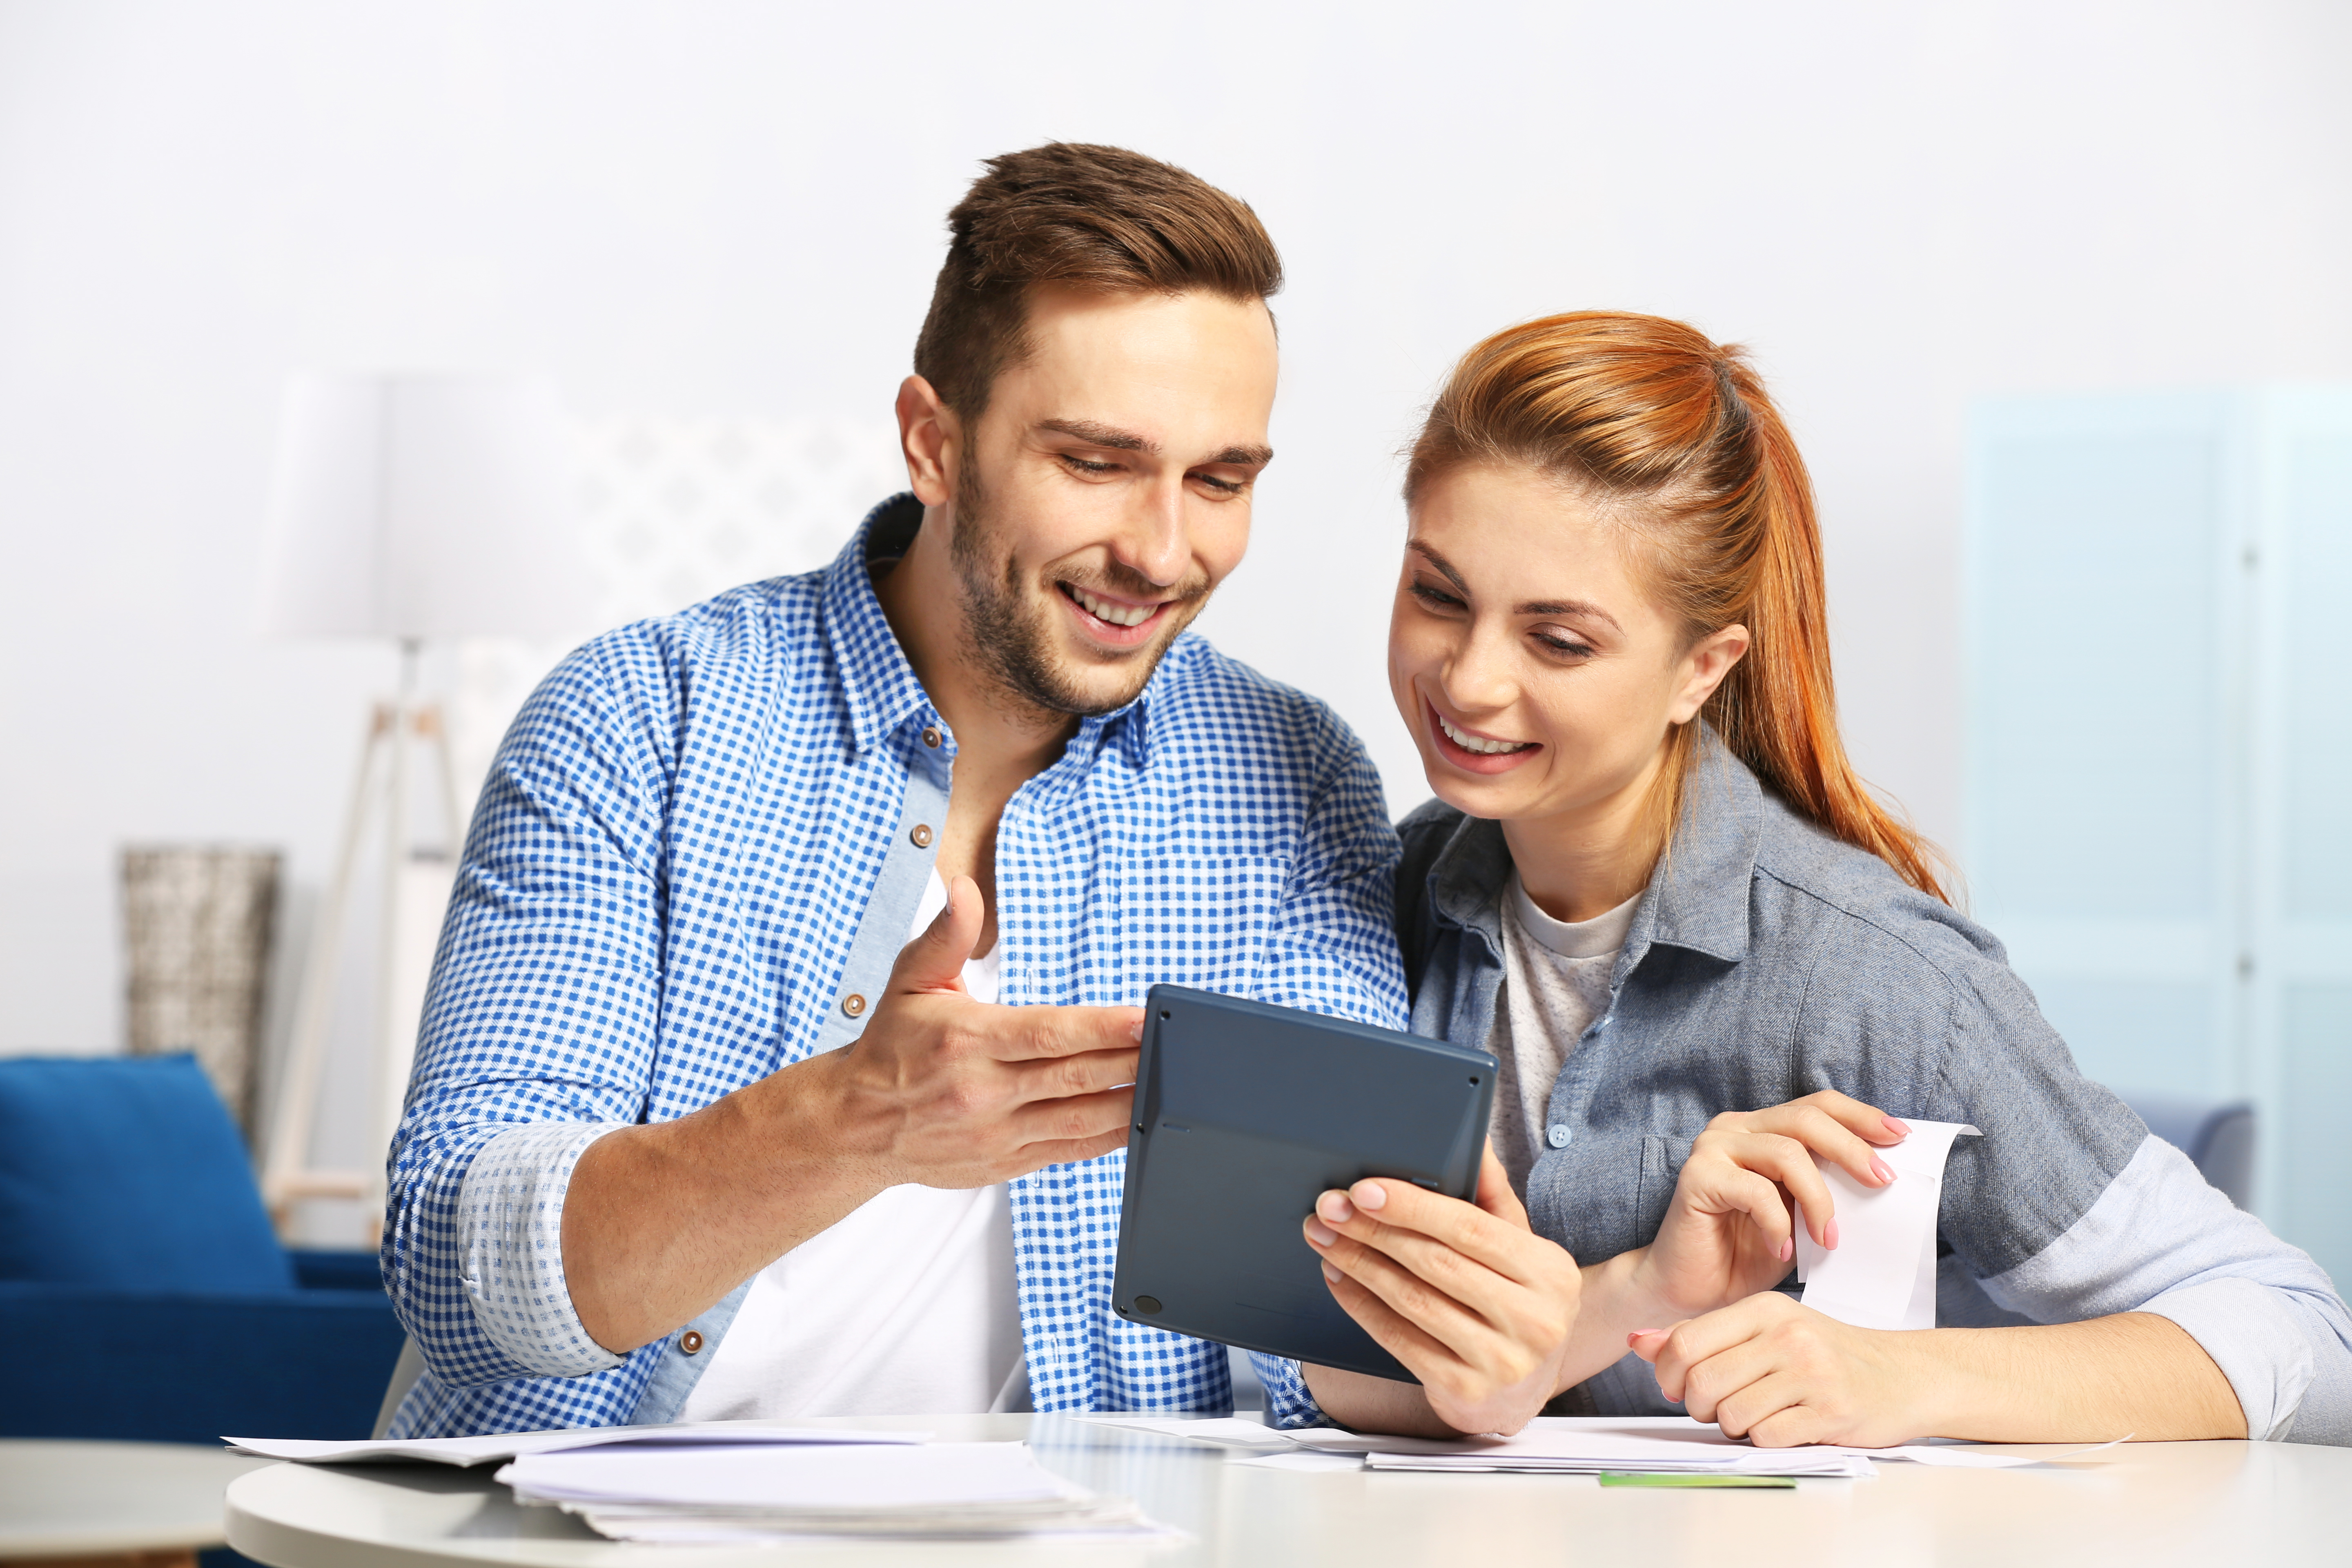 Husband and wife planning budget together | Source: Shutterstock